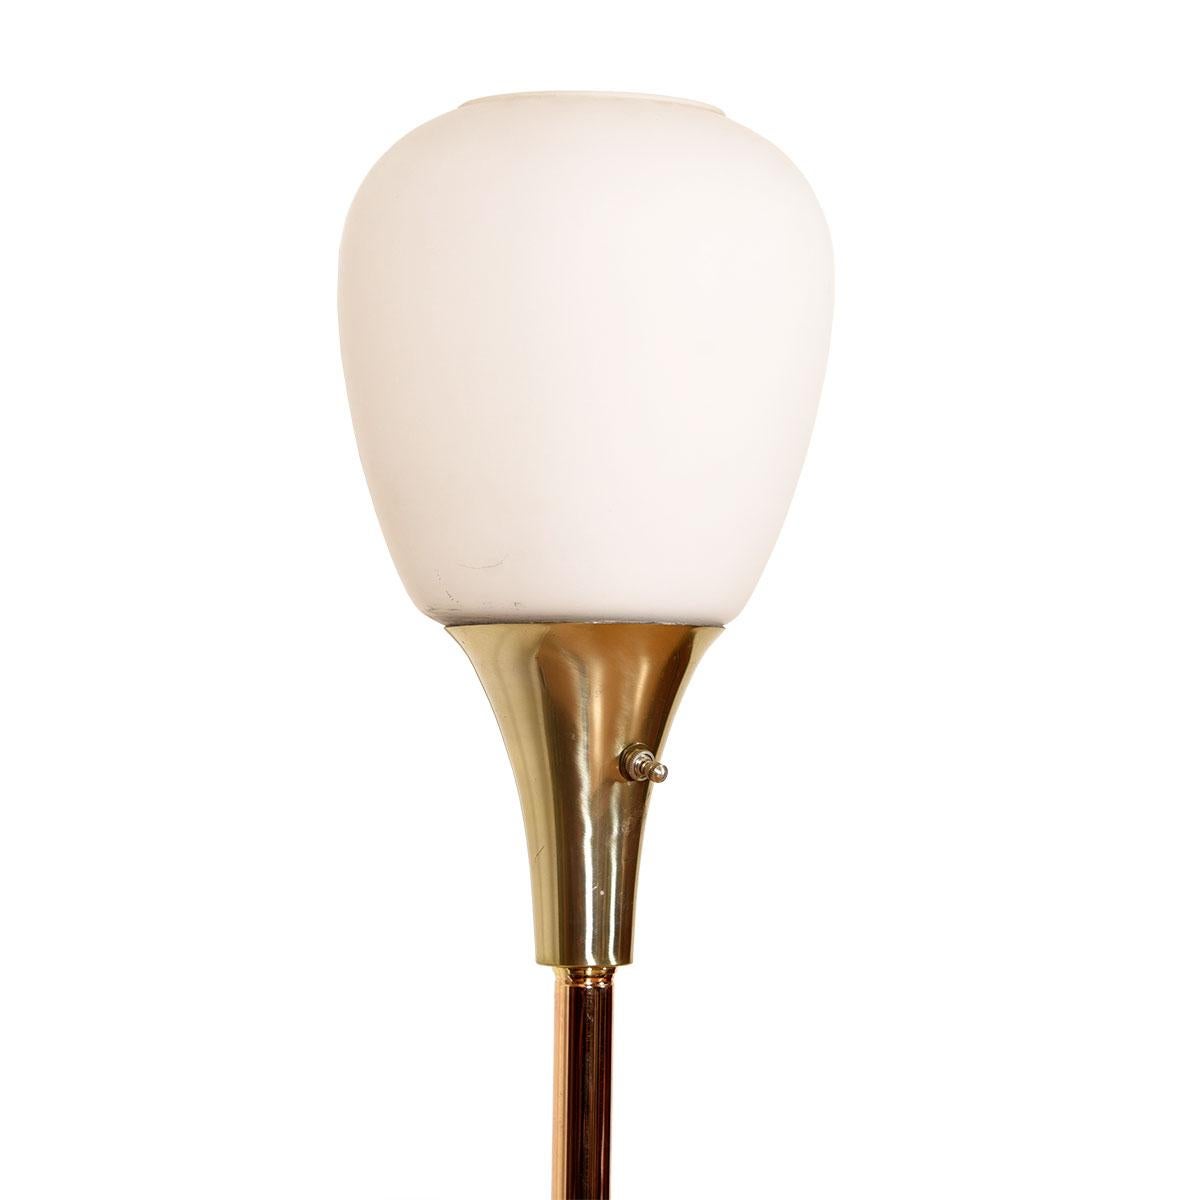 Mid-Century Modern Globe Floor Lamp

Additional information:
Featured at Kensington
Iconic & Original

Dimension: Ø 14 base x H 54 to top of glass shade.